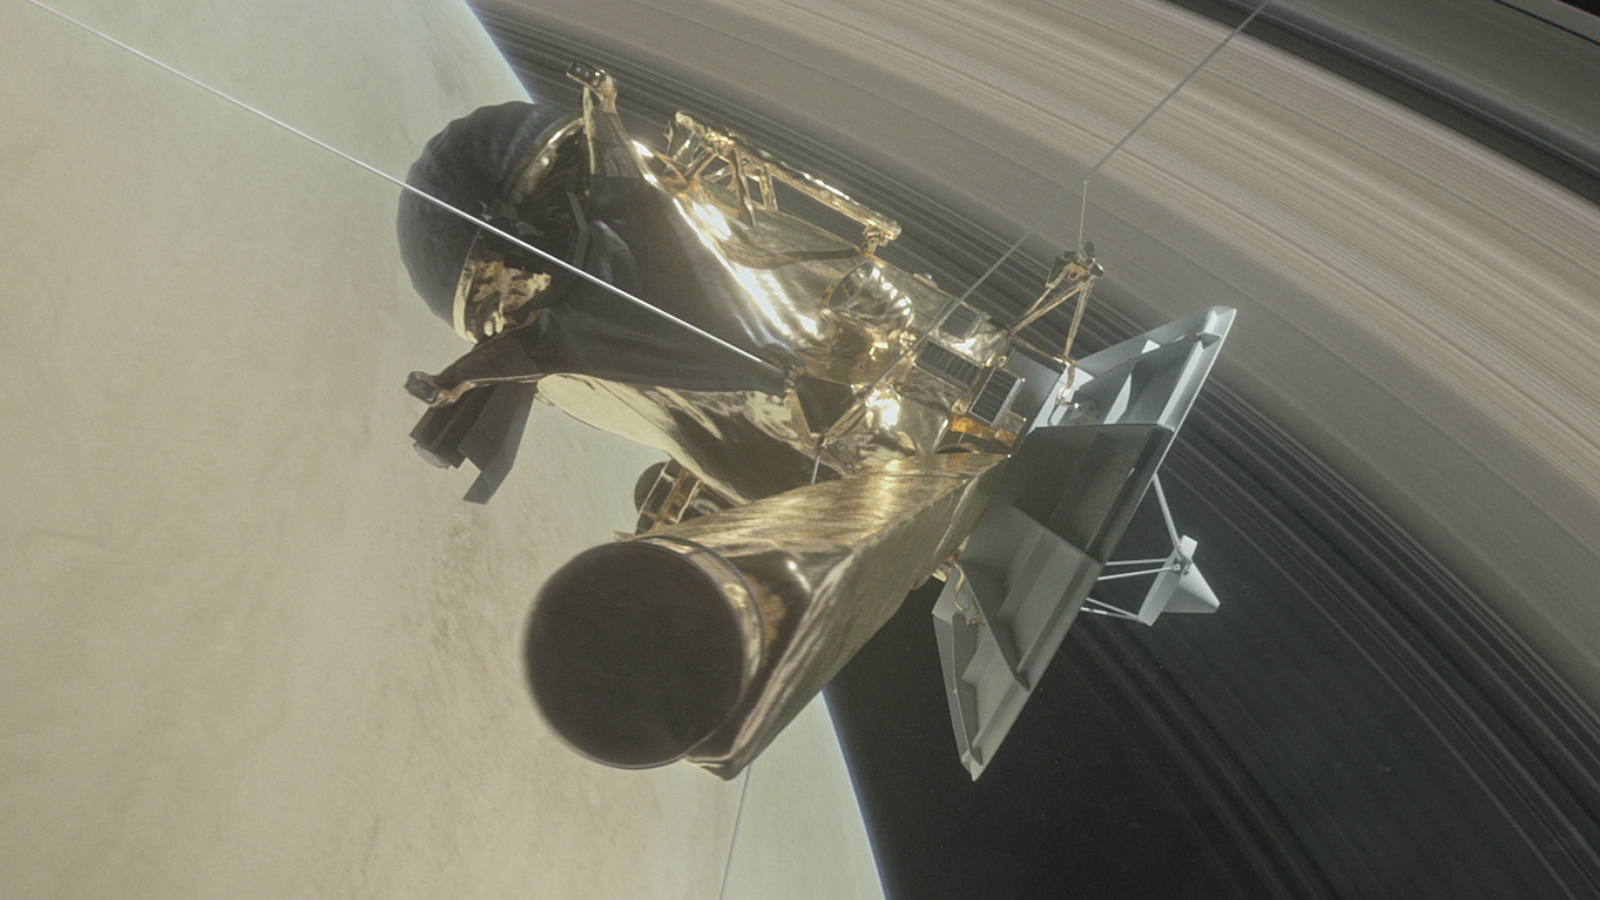 Downloadable fact sheet about Cassini end of mission.